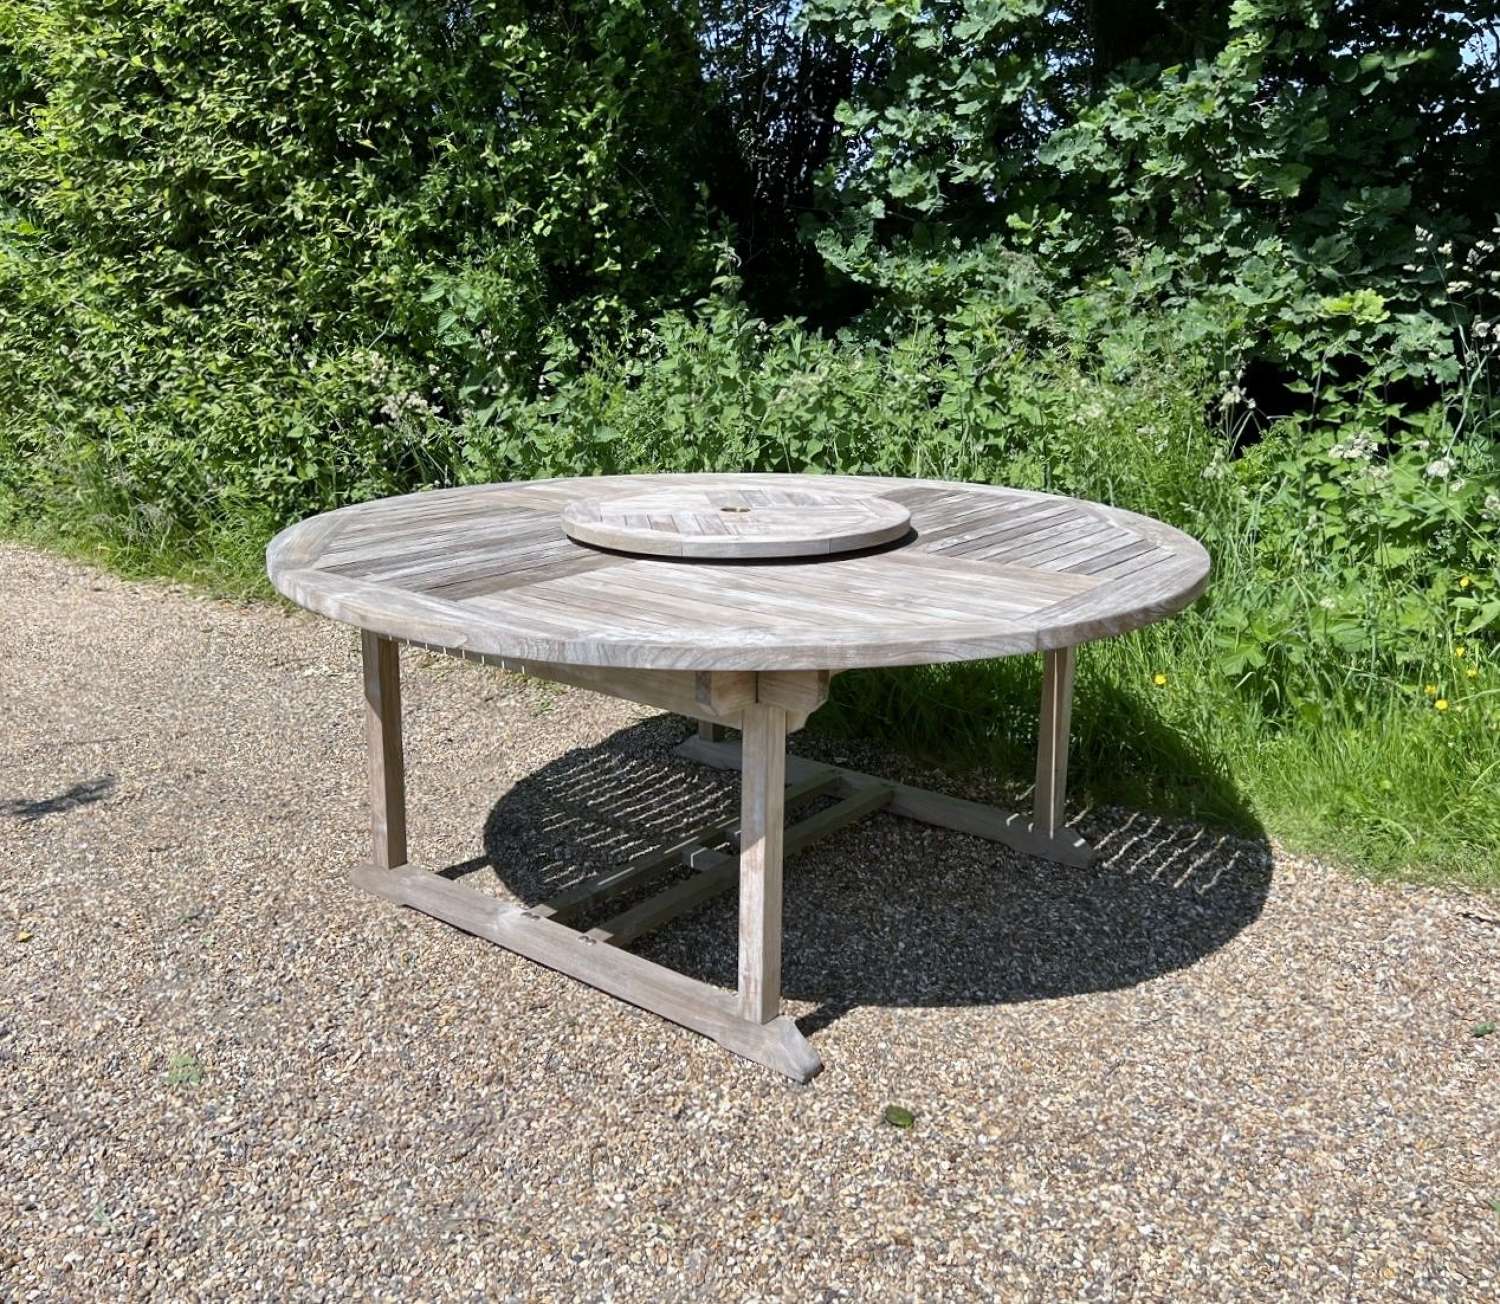 Large Silvered Teak Table for 8 chairs